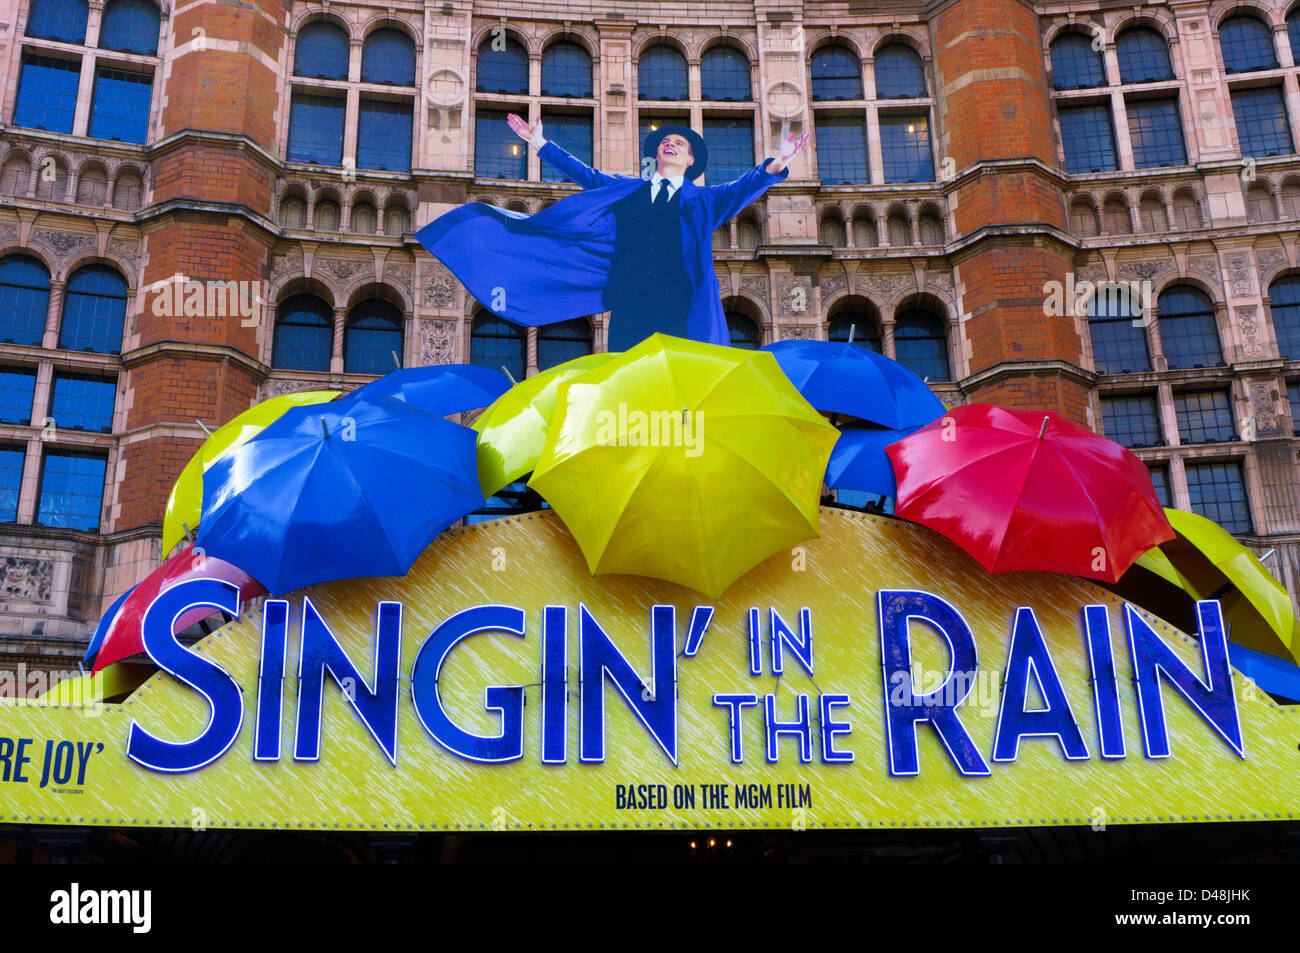 An advert for the musical 'Singin' in the Rain' covers the front of the Palace Theatre. Stock Photo